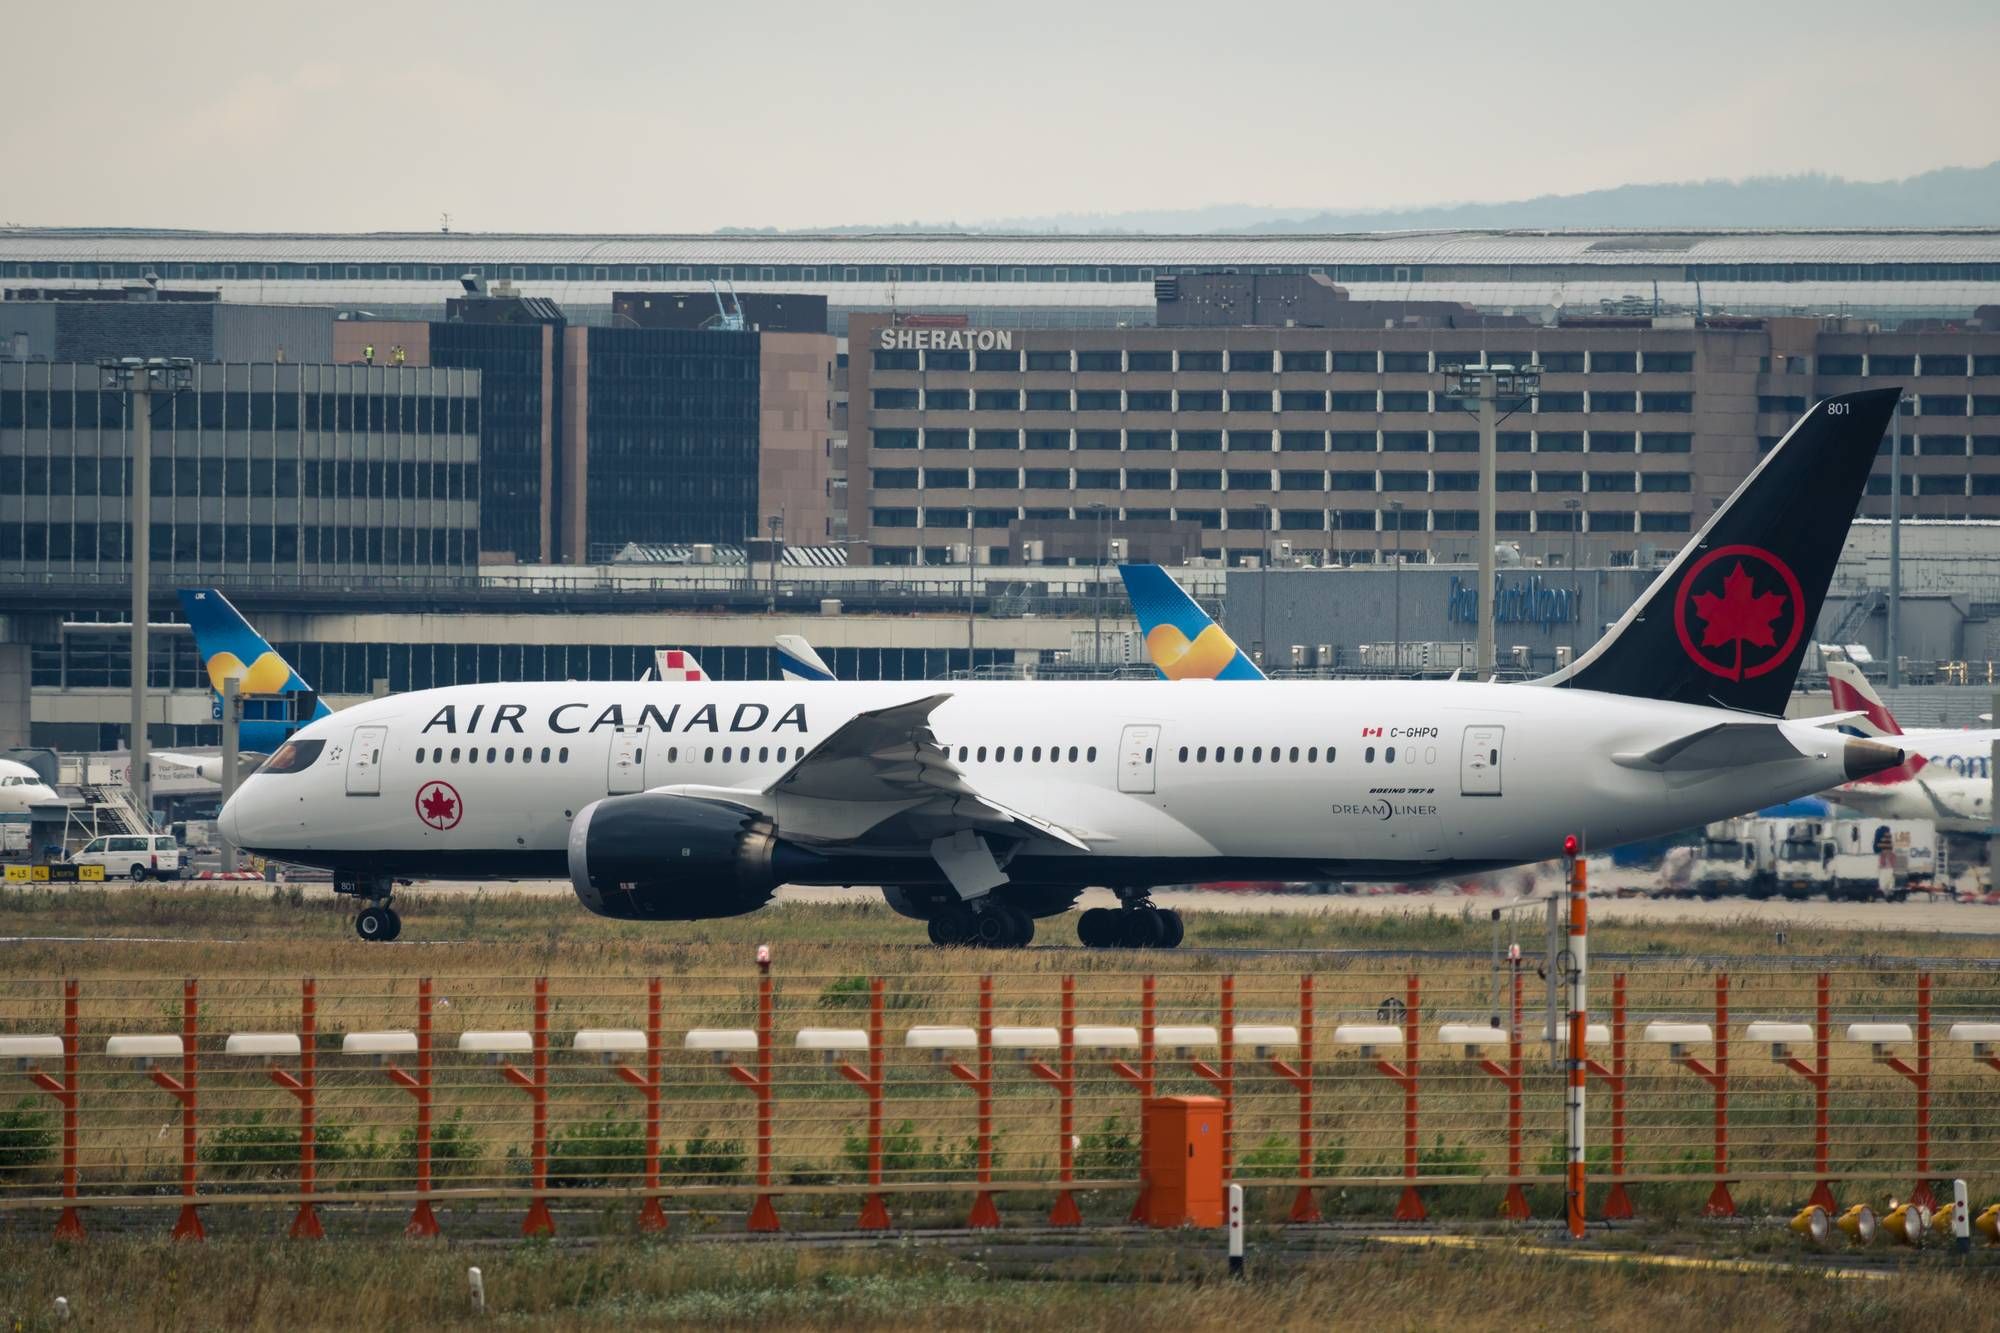 Air Canada plane regarding the class action lawsuit filed against Canadian airlines for not offering passengers a refund for tickets amid COVID-19, instead offering vouchers